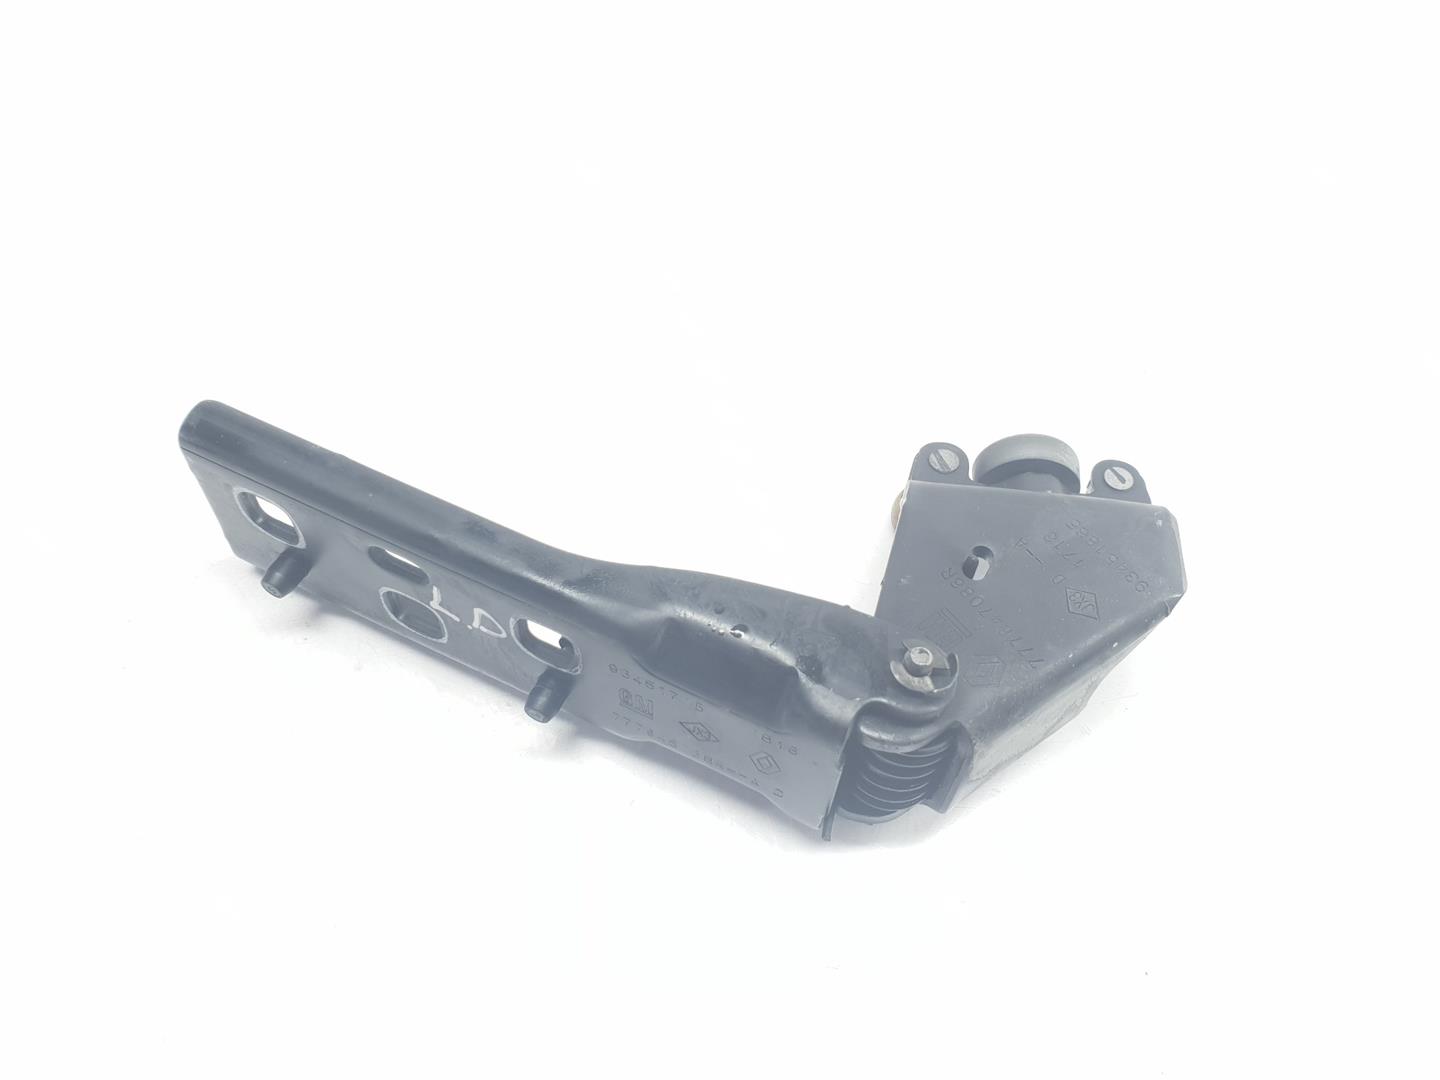 RENAULT Trafic 2 generation (2001-2015) Other Body Parts 777647086R, 777647086R 24239887